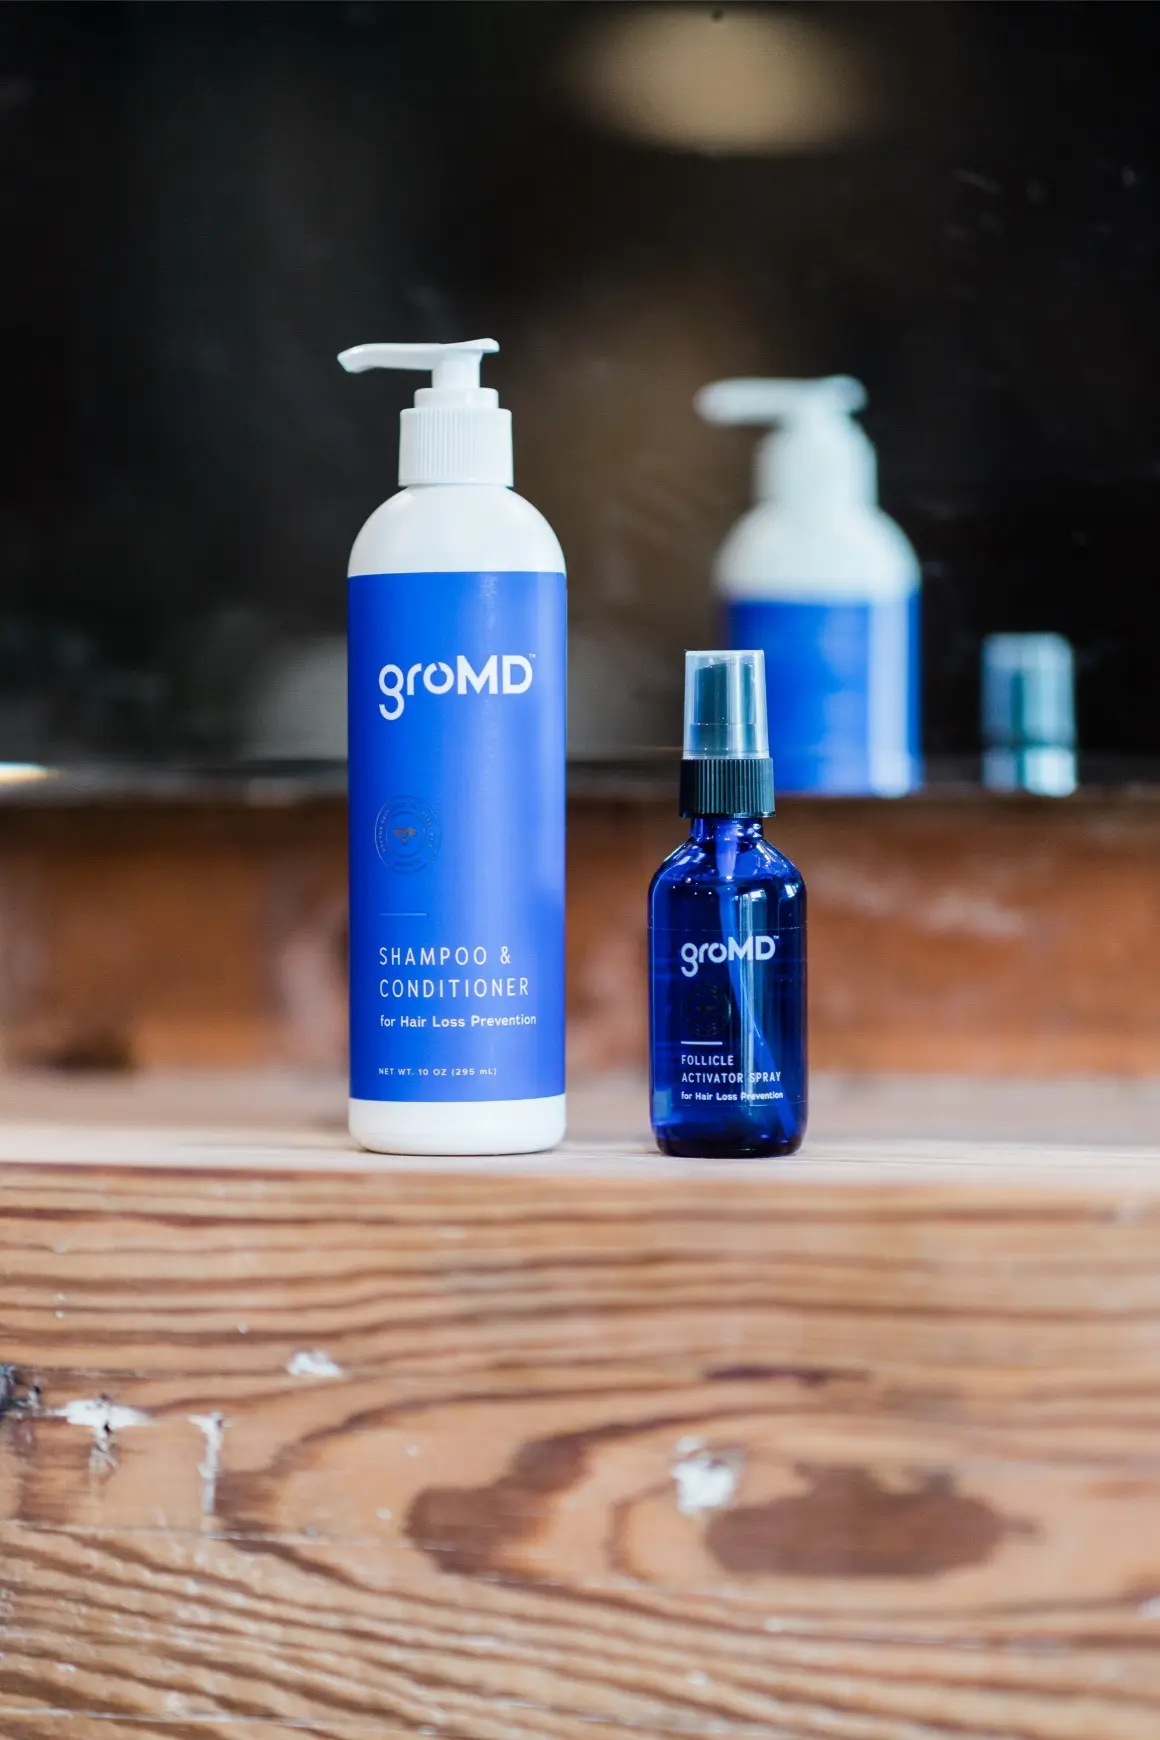 Do Hair Loss Shampoos Really Work? This One Does